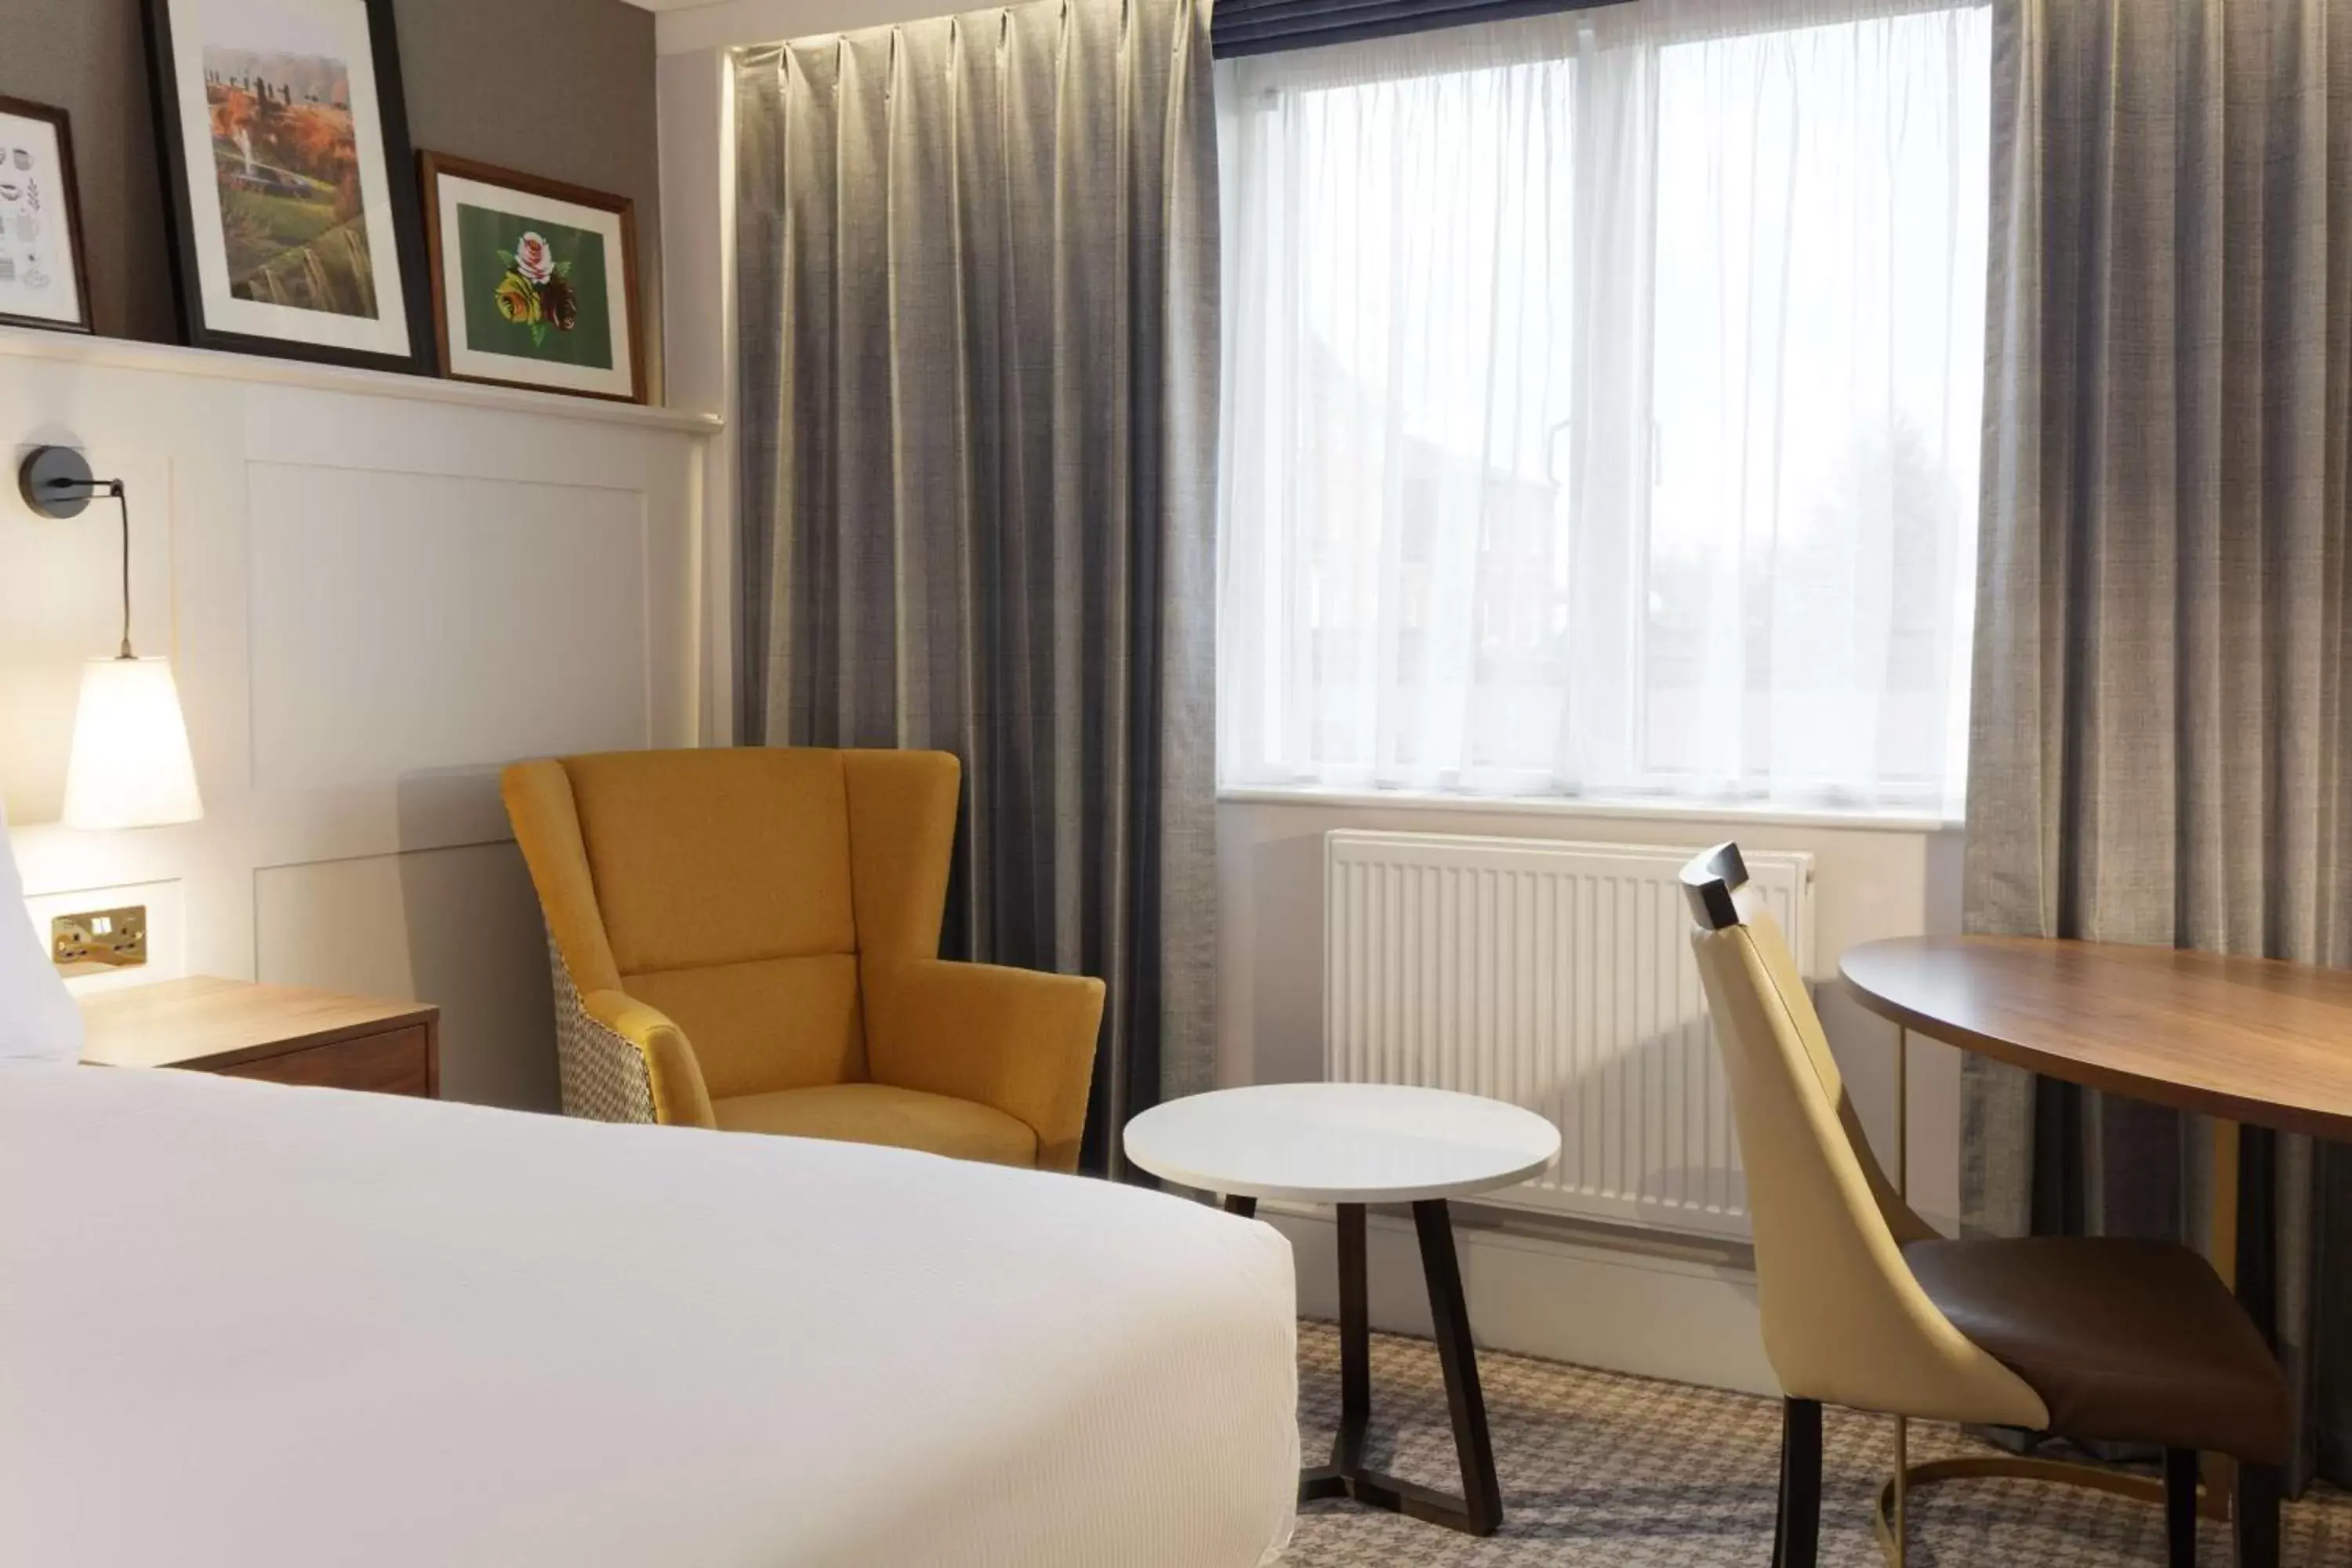 Bedroom, Seating Area in DoubleTree by Hilton Stoke-on-Trent, United Kingdom